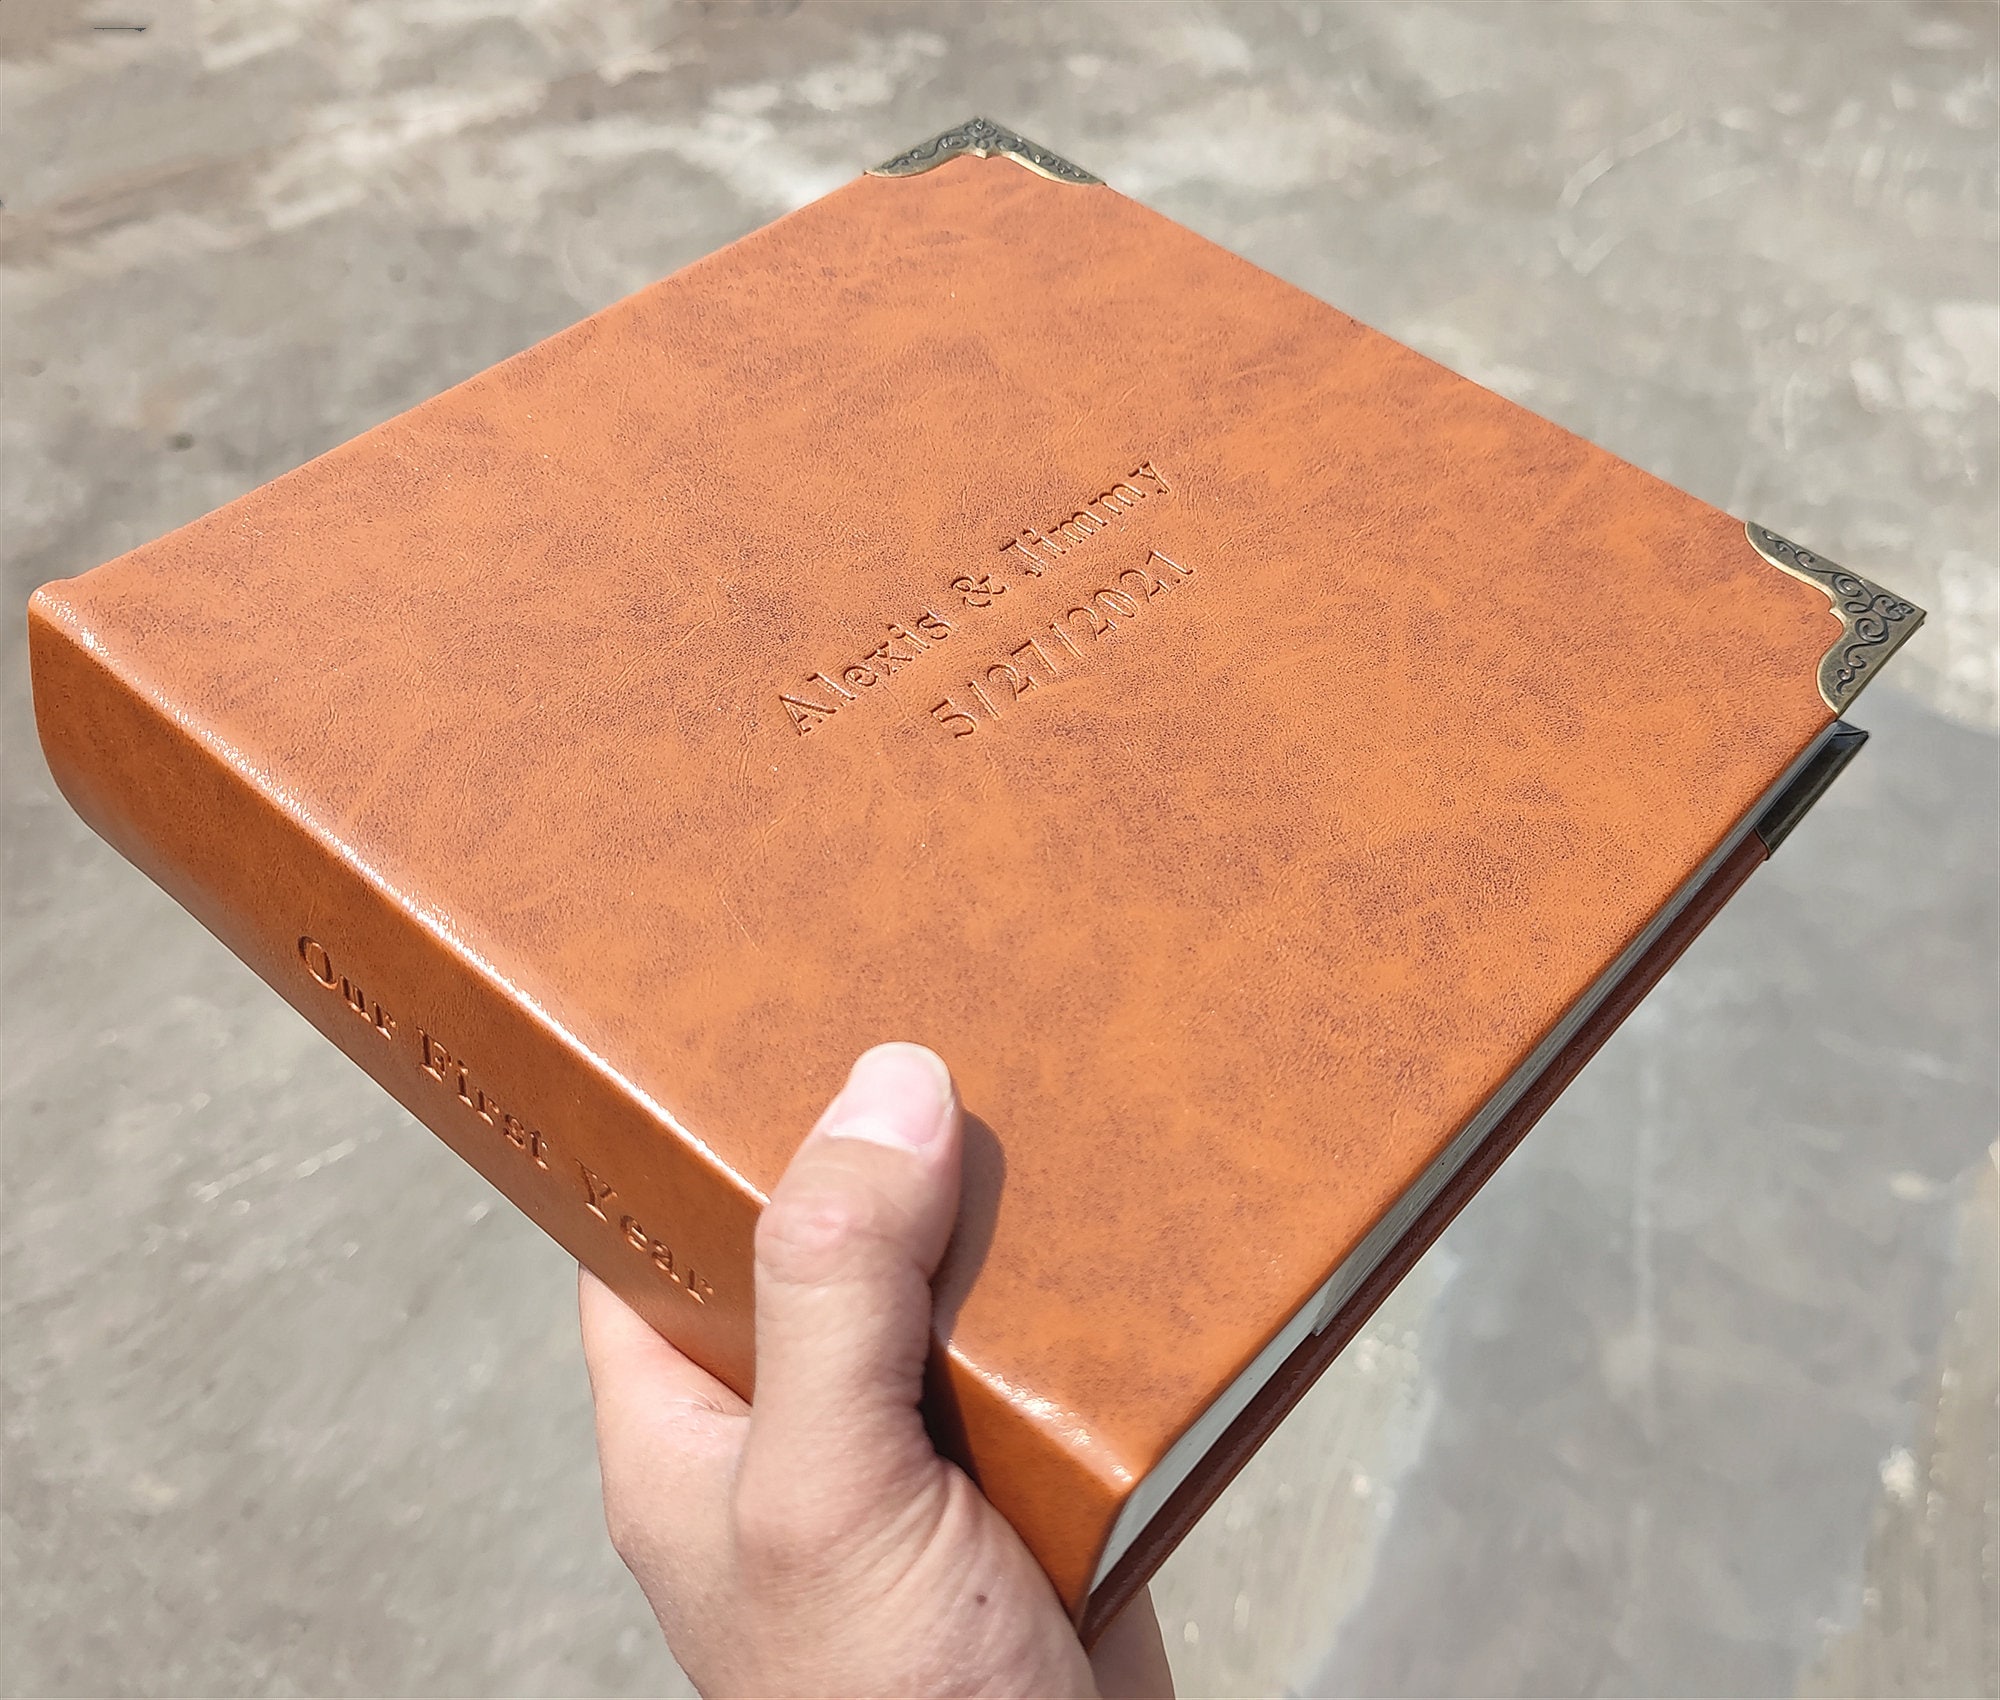 Our Adventure Book, Travel Photo Album, Personalized Leather